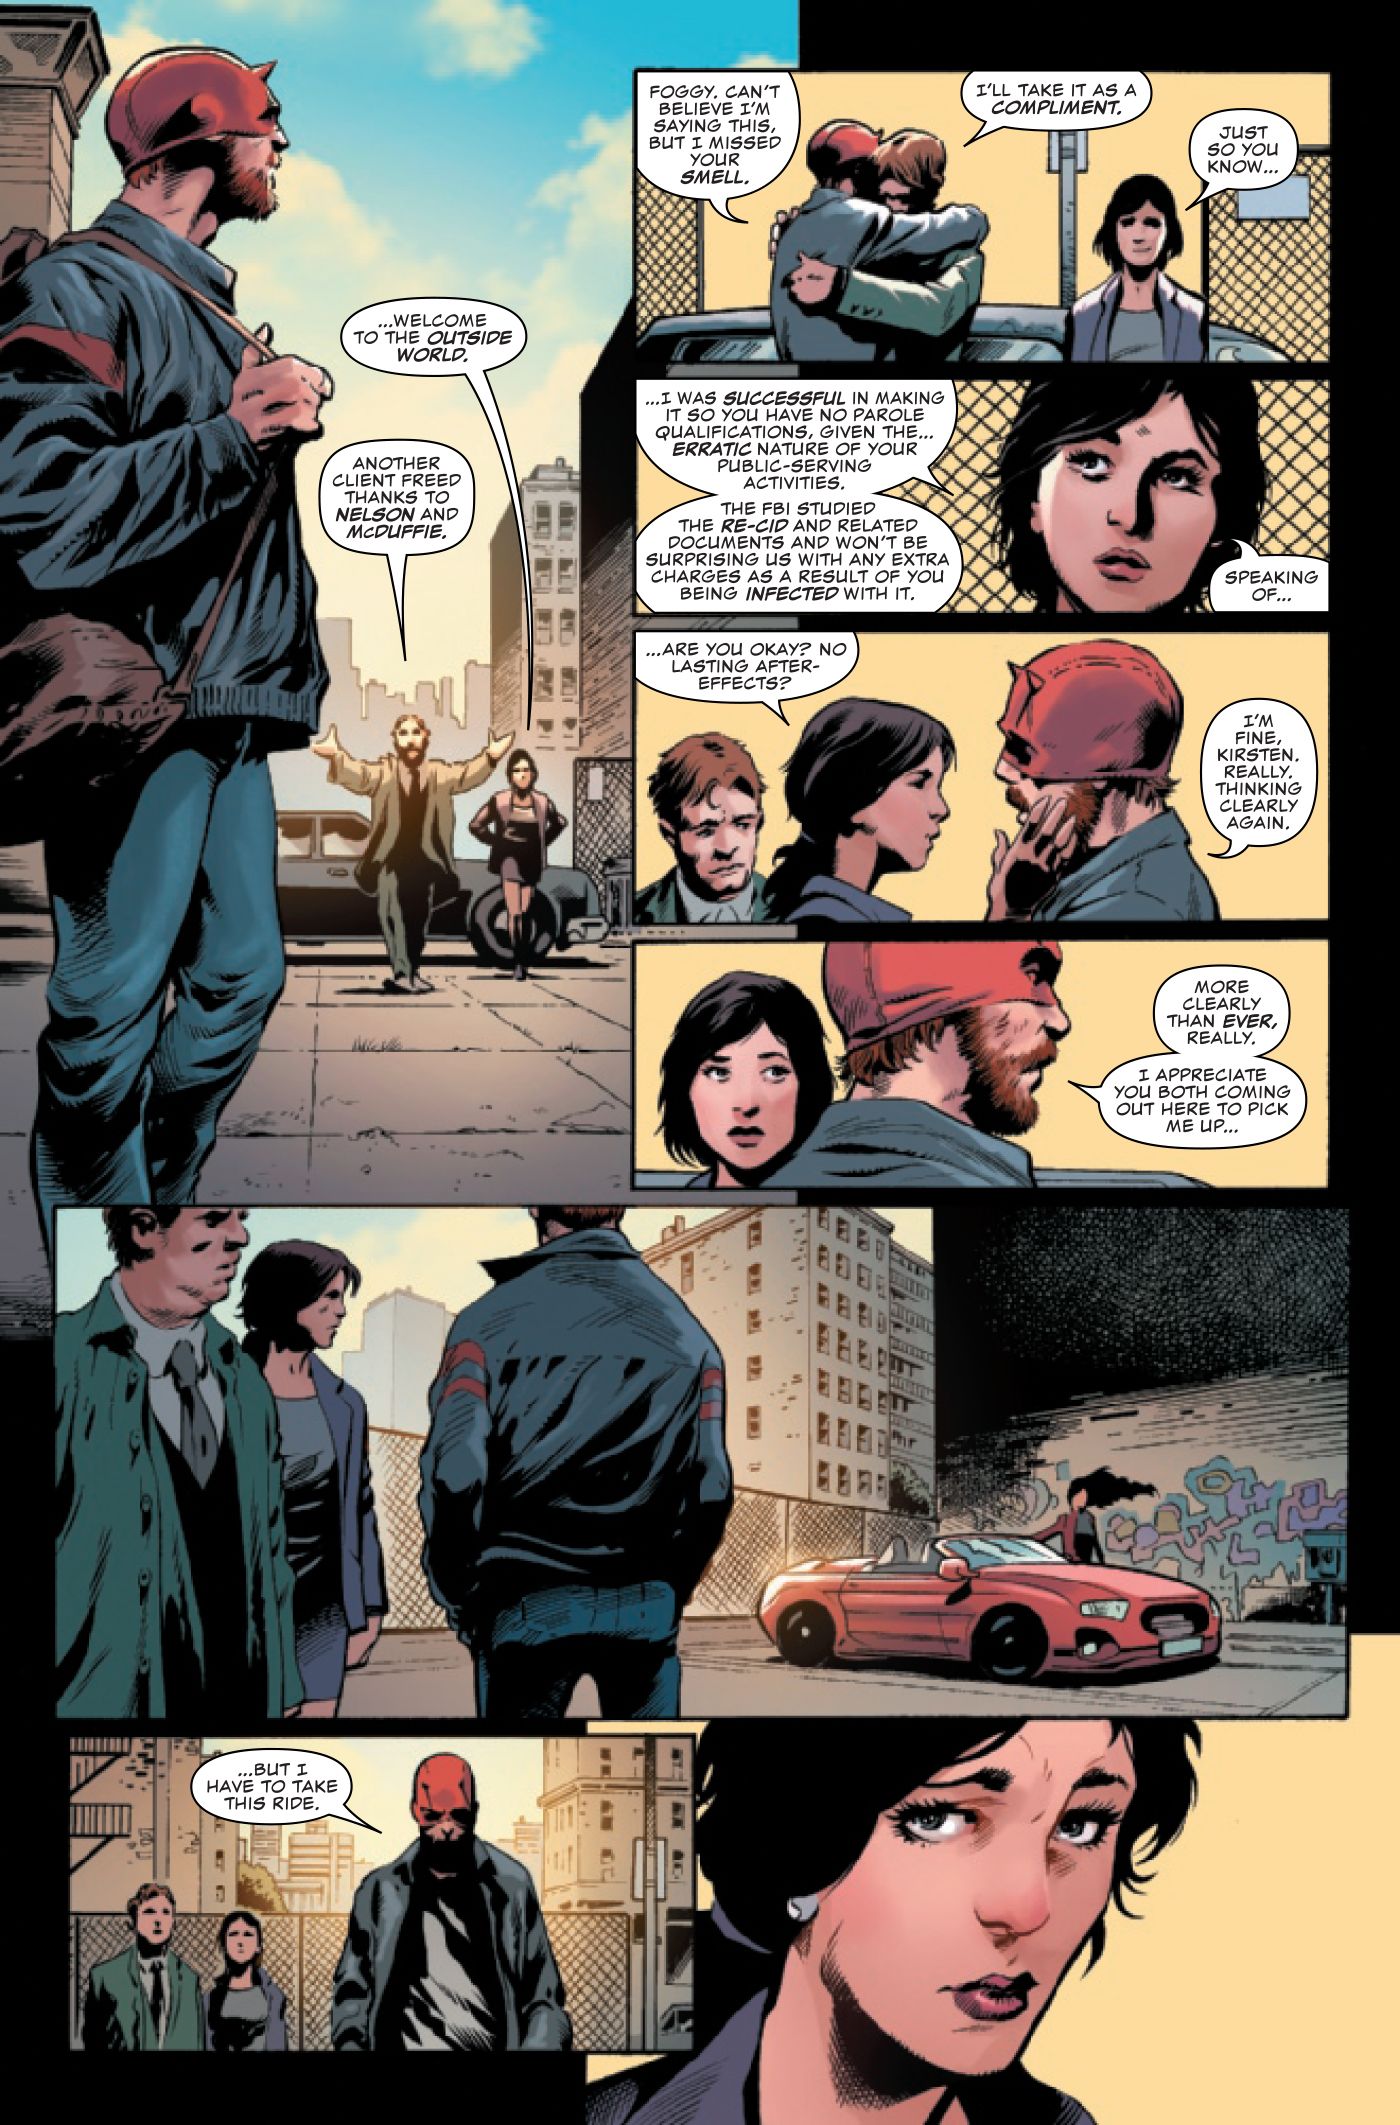 Daredevil is greeted by Foggy Nelson and Kirsten McDuffie.